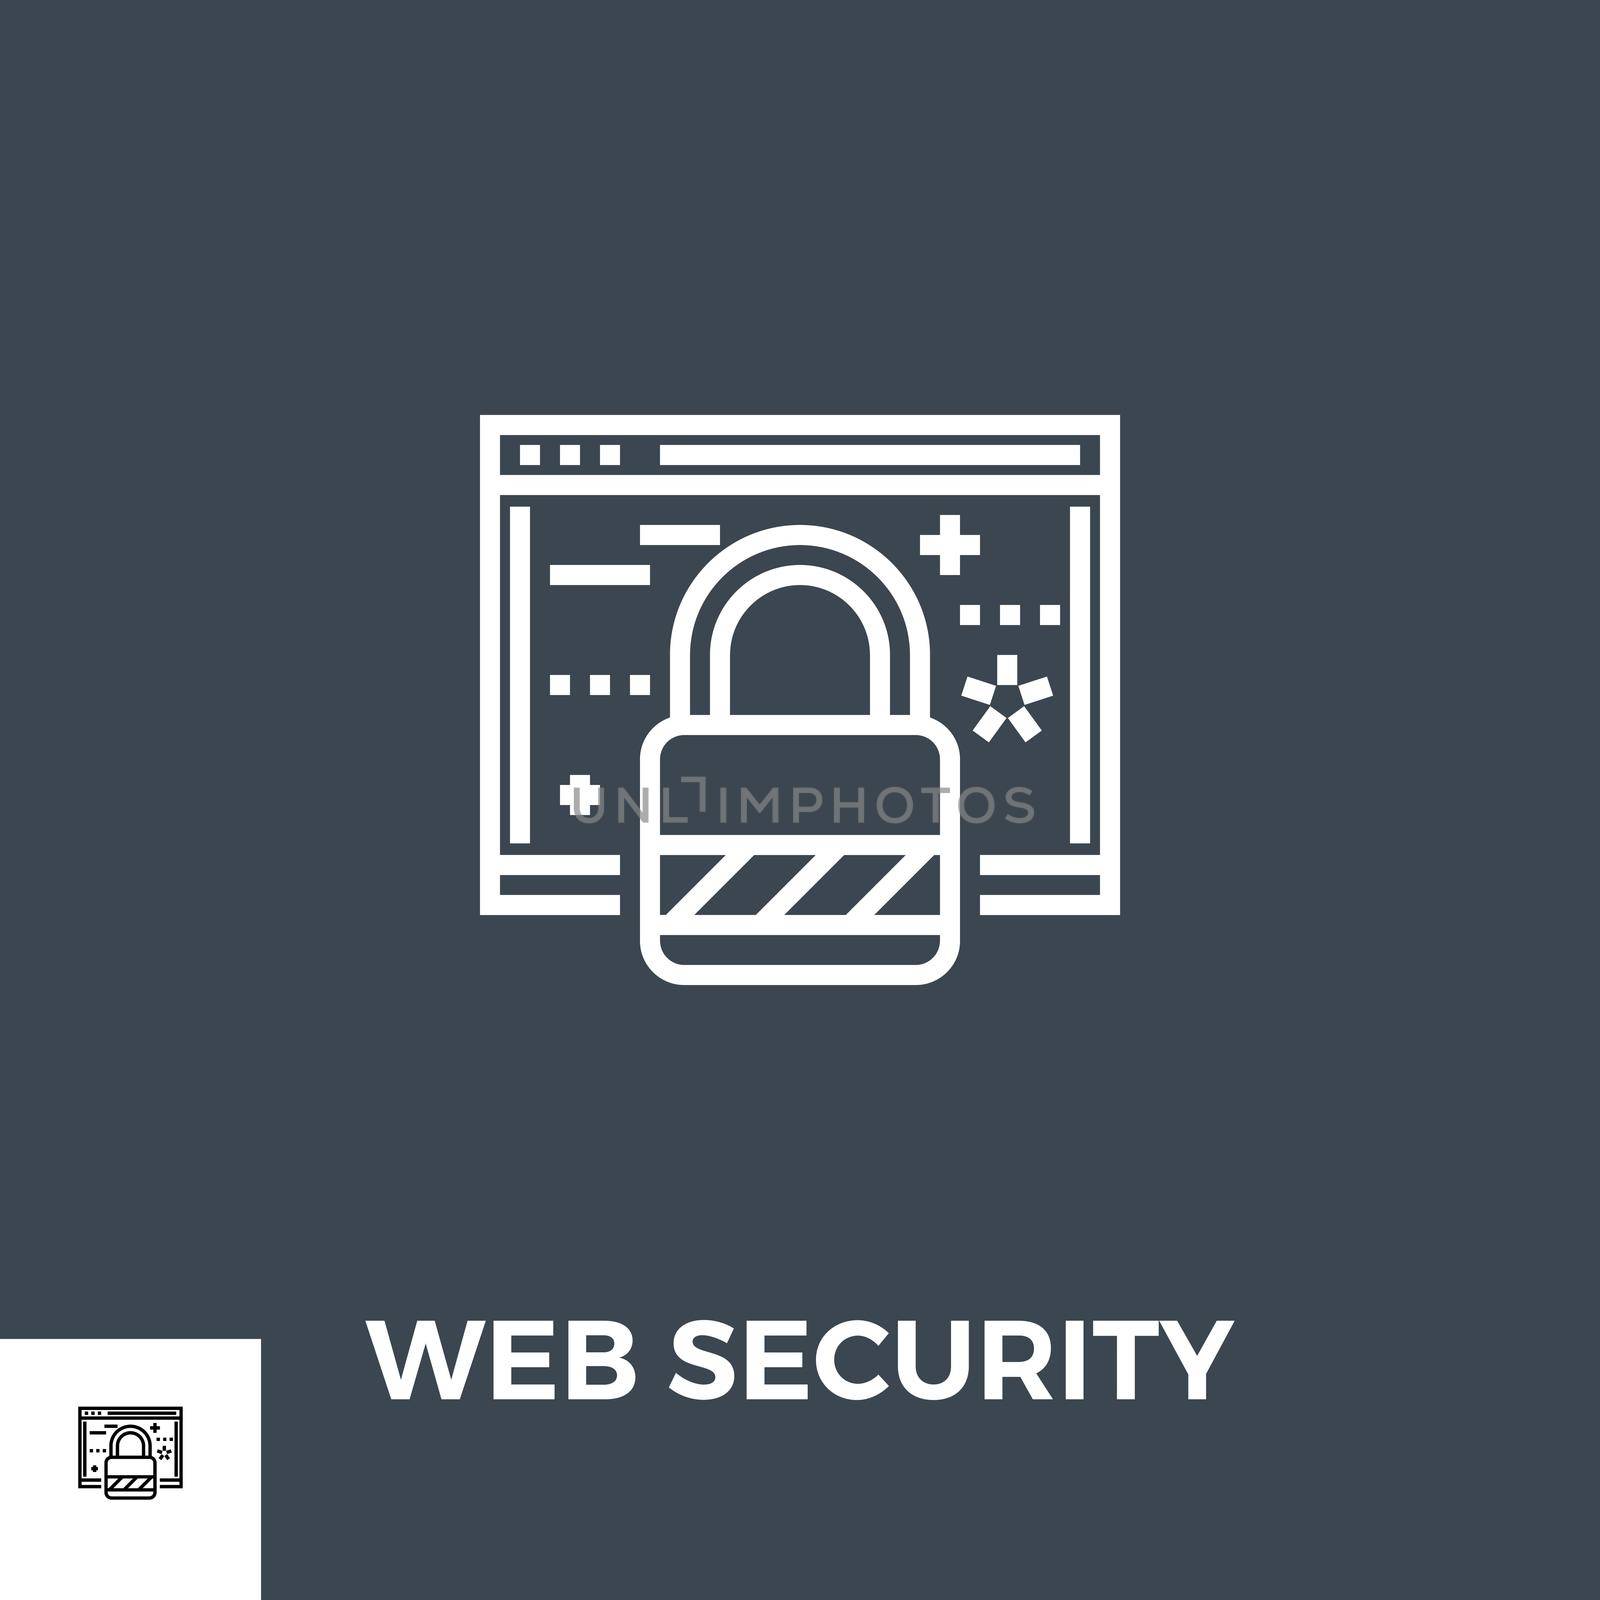 Web Security Related Vector Thin Line Icon. Isolated on Black Background. Vector Illustration.